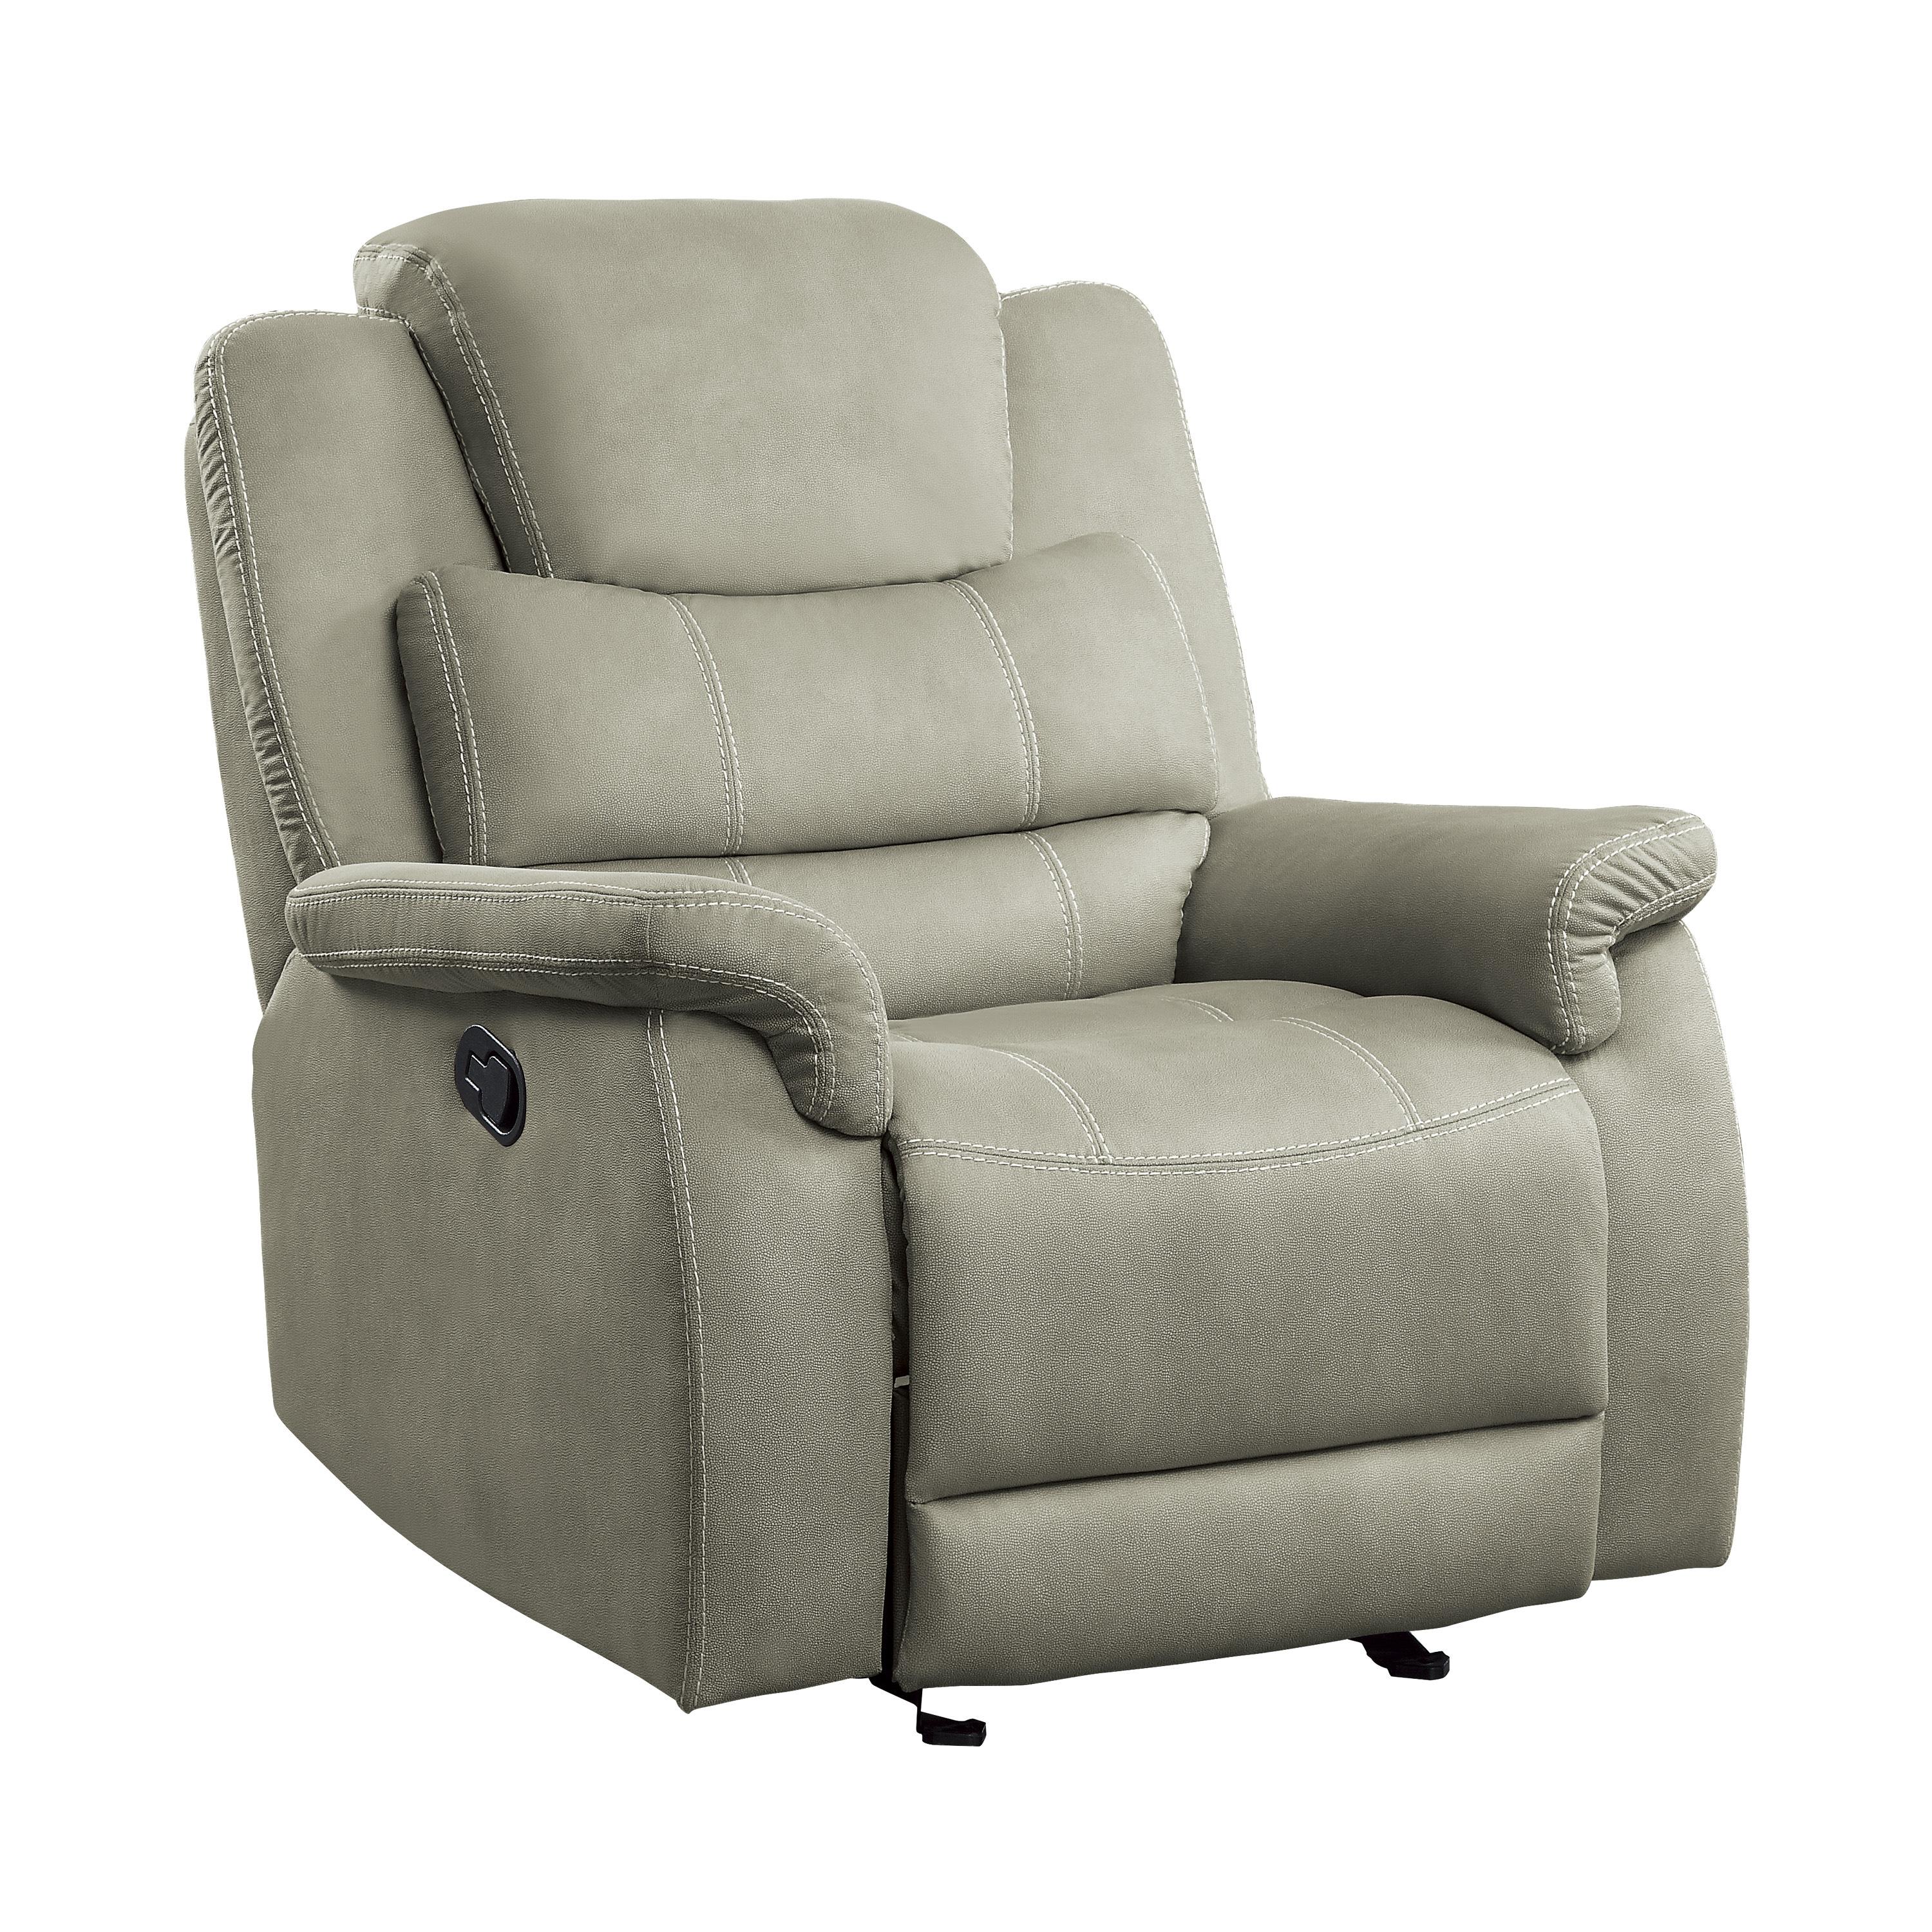 

    
Transitional Gray Microfiber Reclining Chair Homelegance 9848GY-1 Shola
